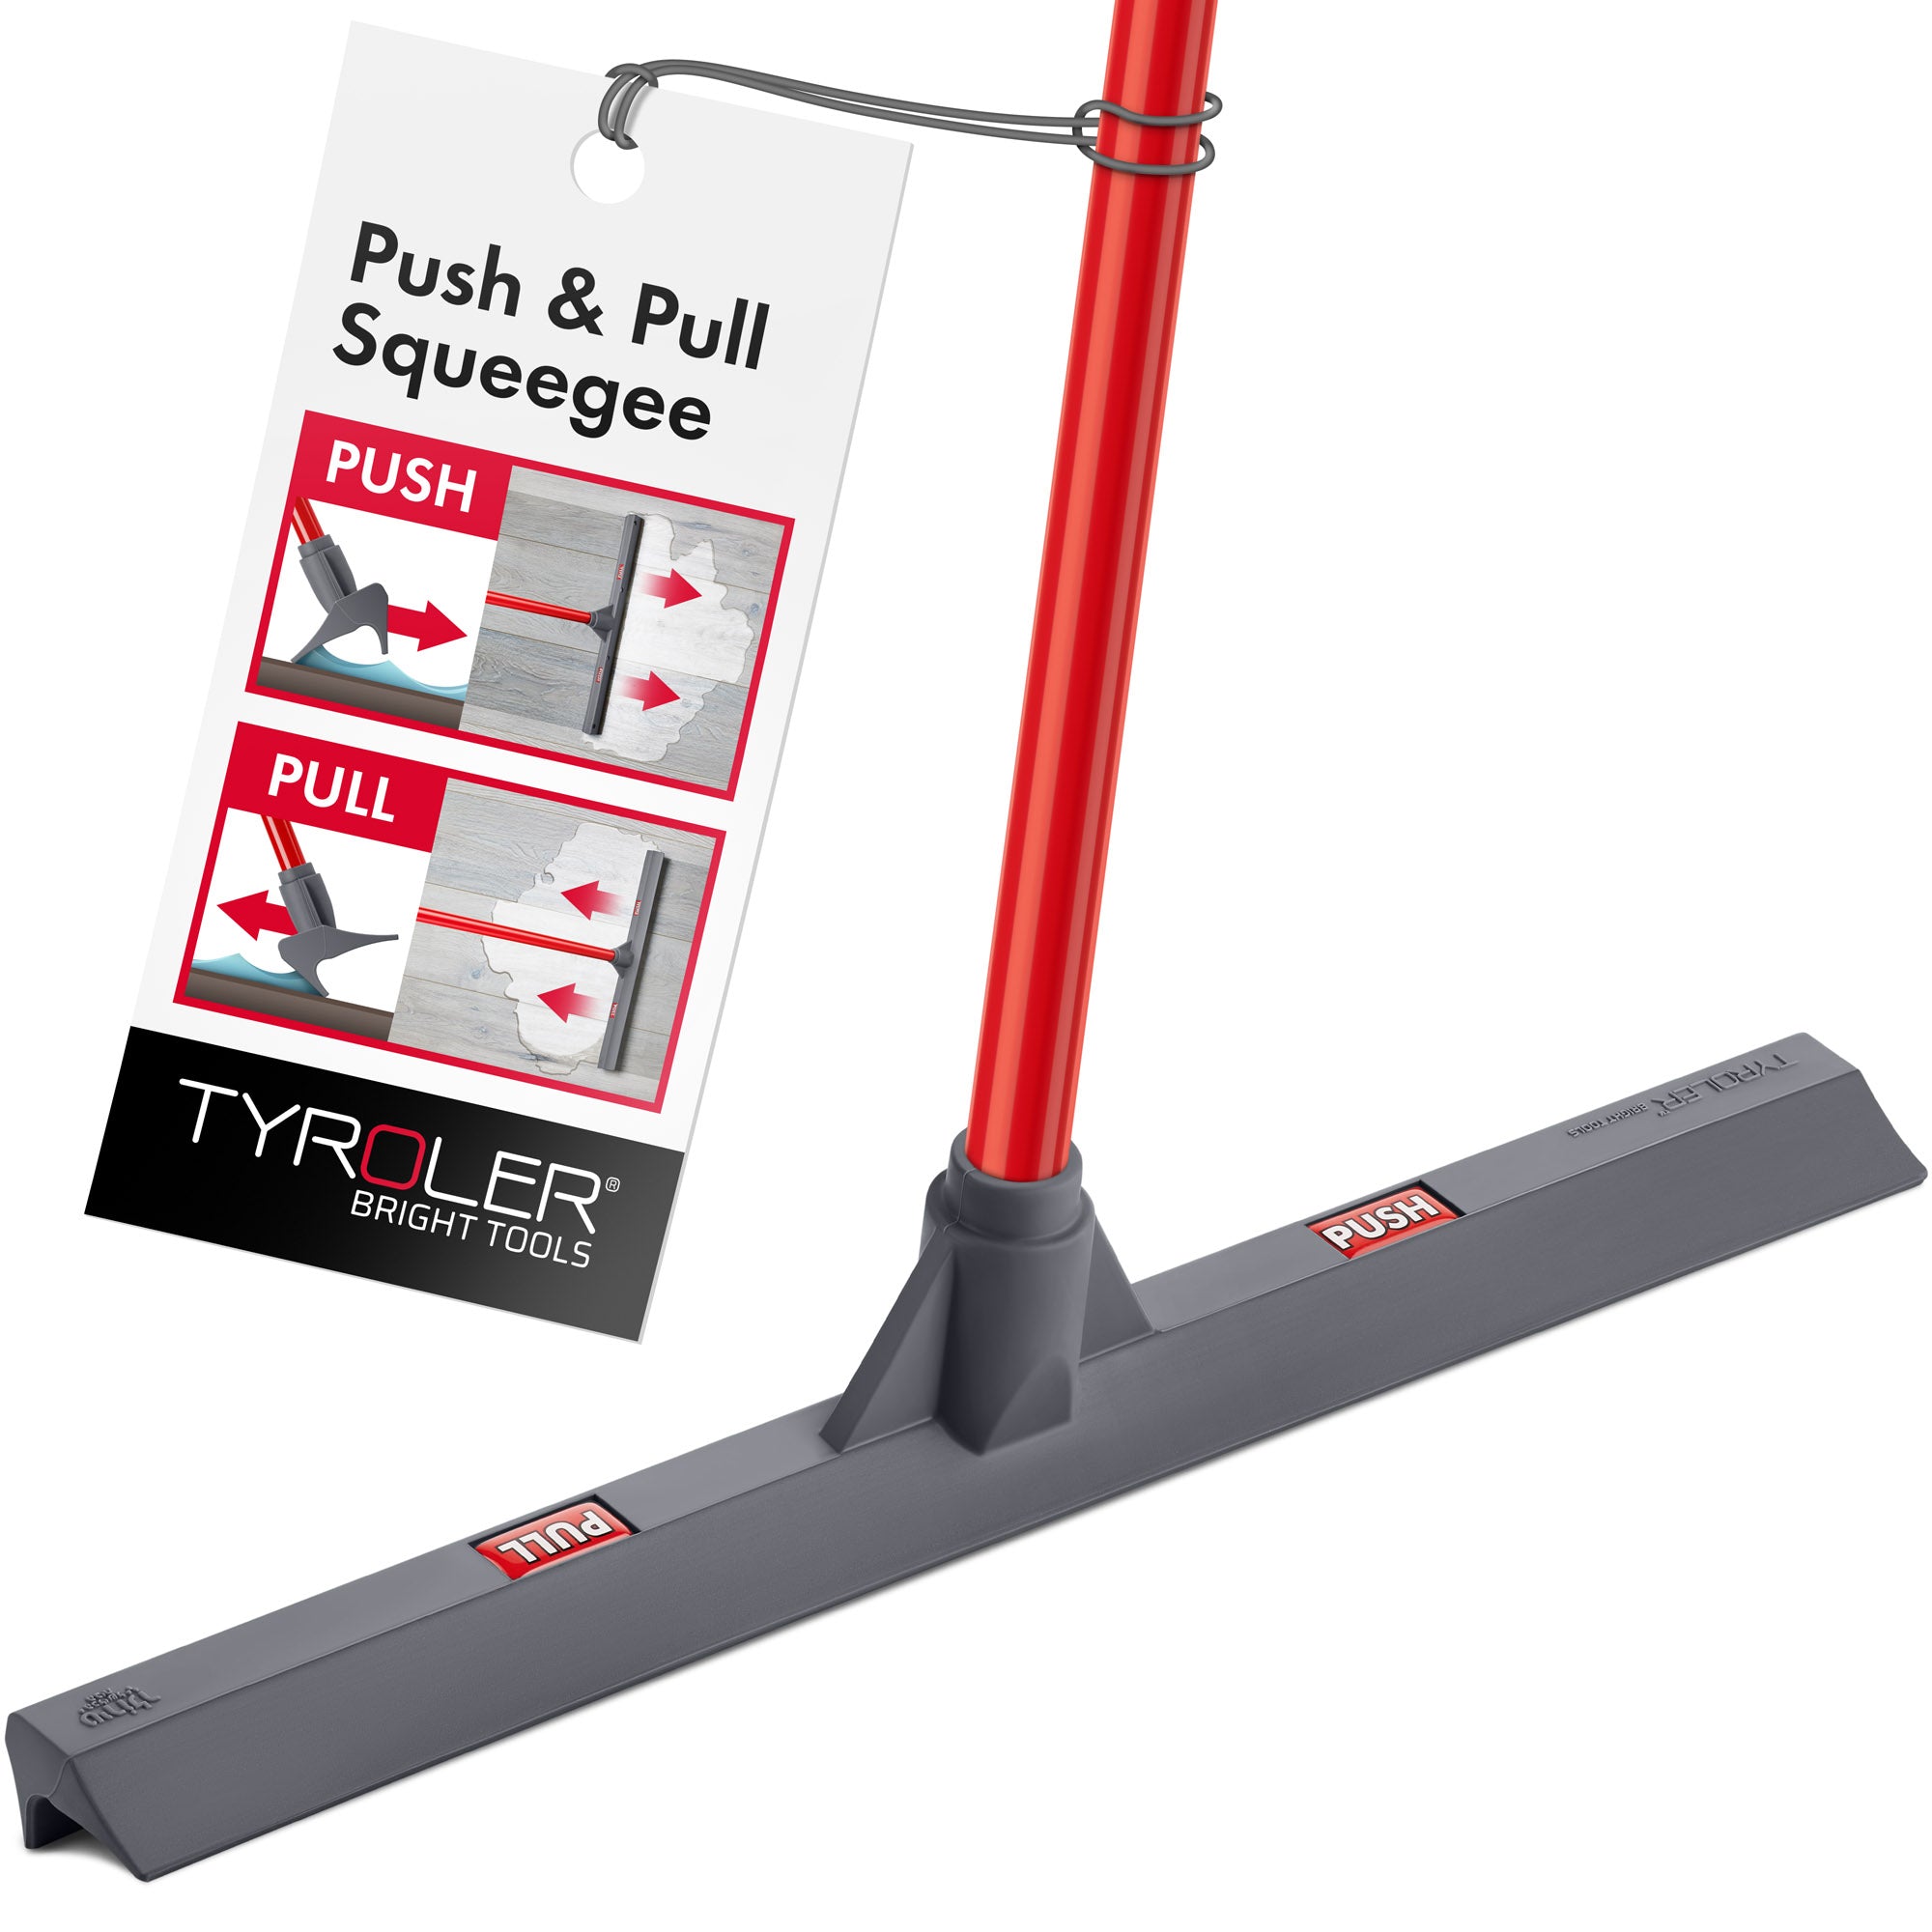 Flexible silicone Window Squeegee 45cm/18in - Tyroler